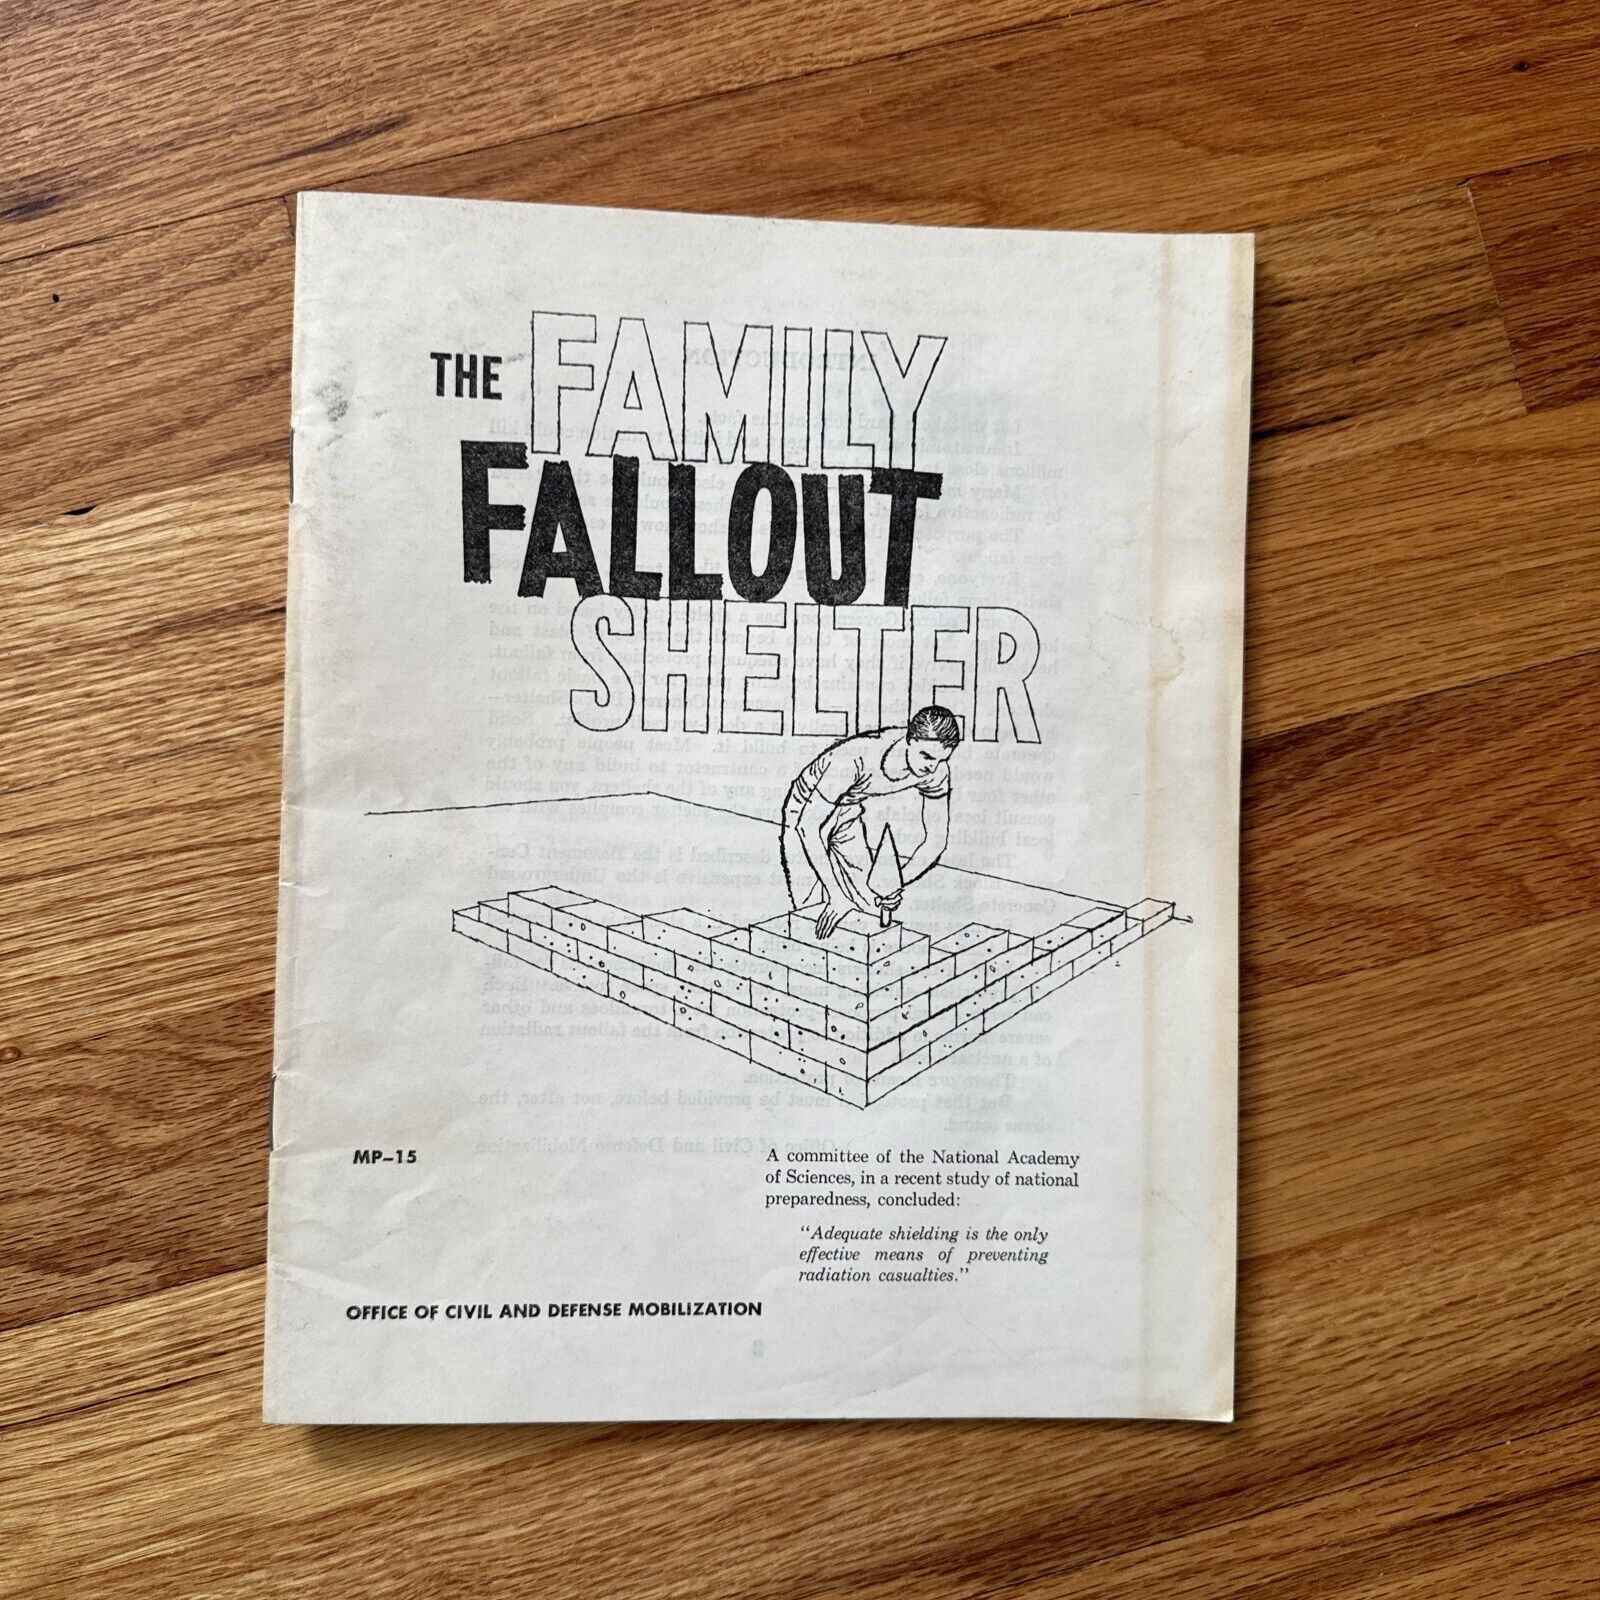 Vintage 1959 The Family Fallout Shelter Booklet-How to Build Fallout Shelters